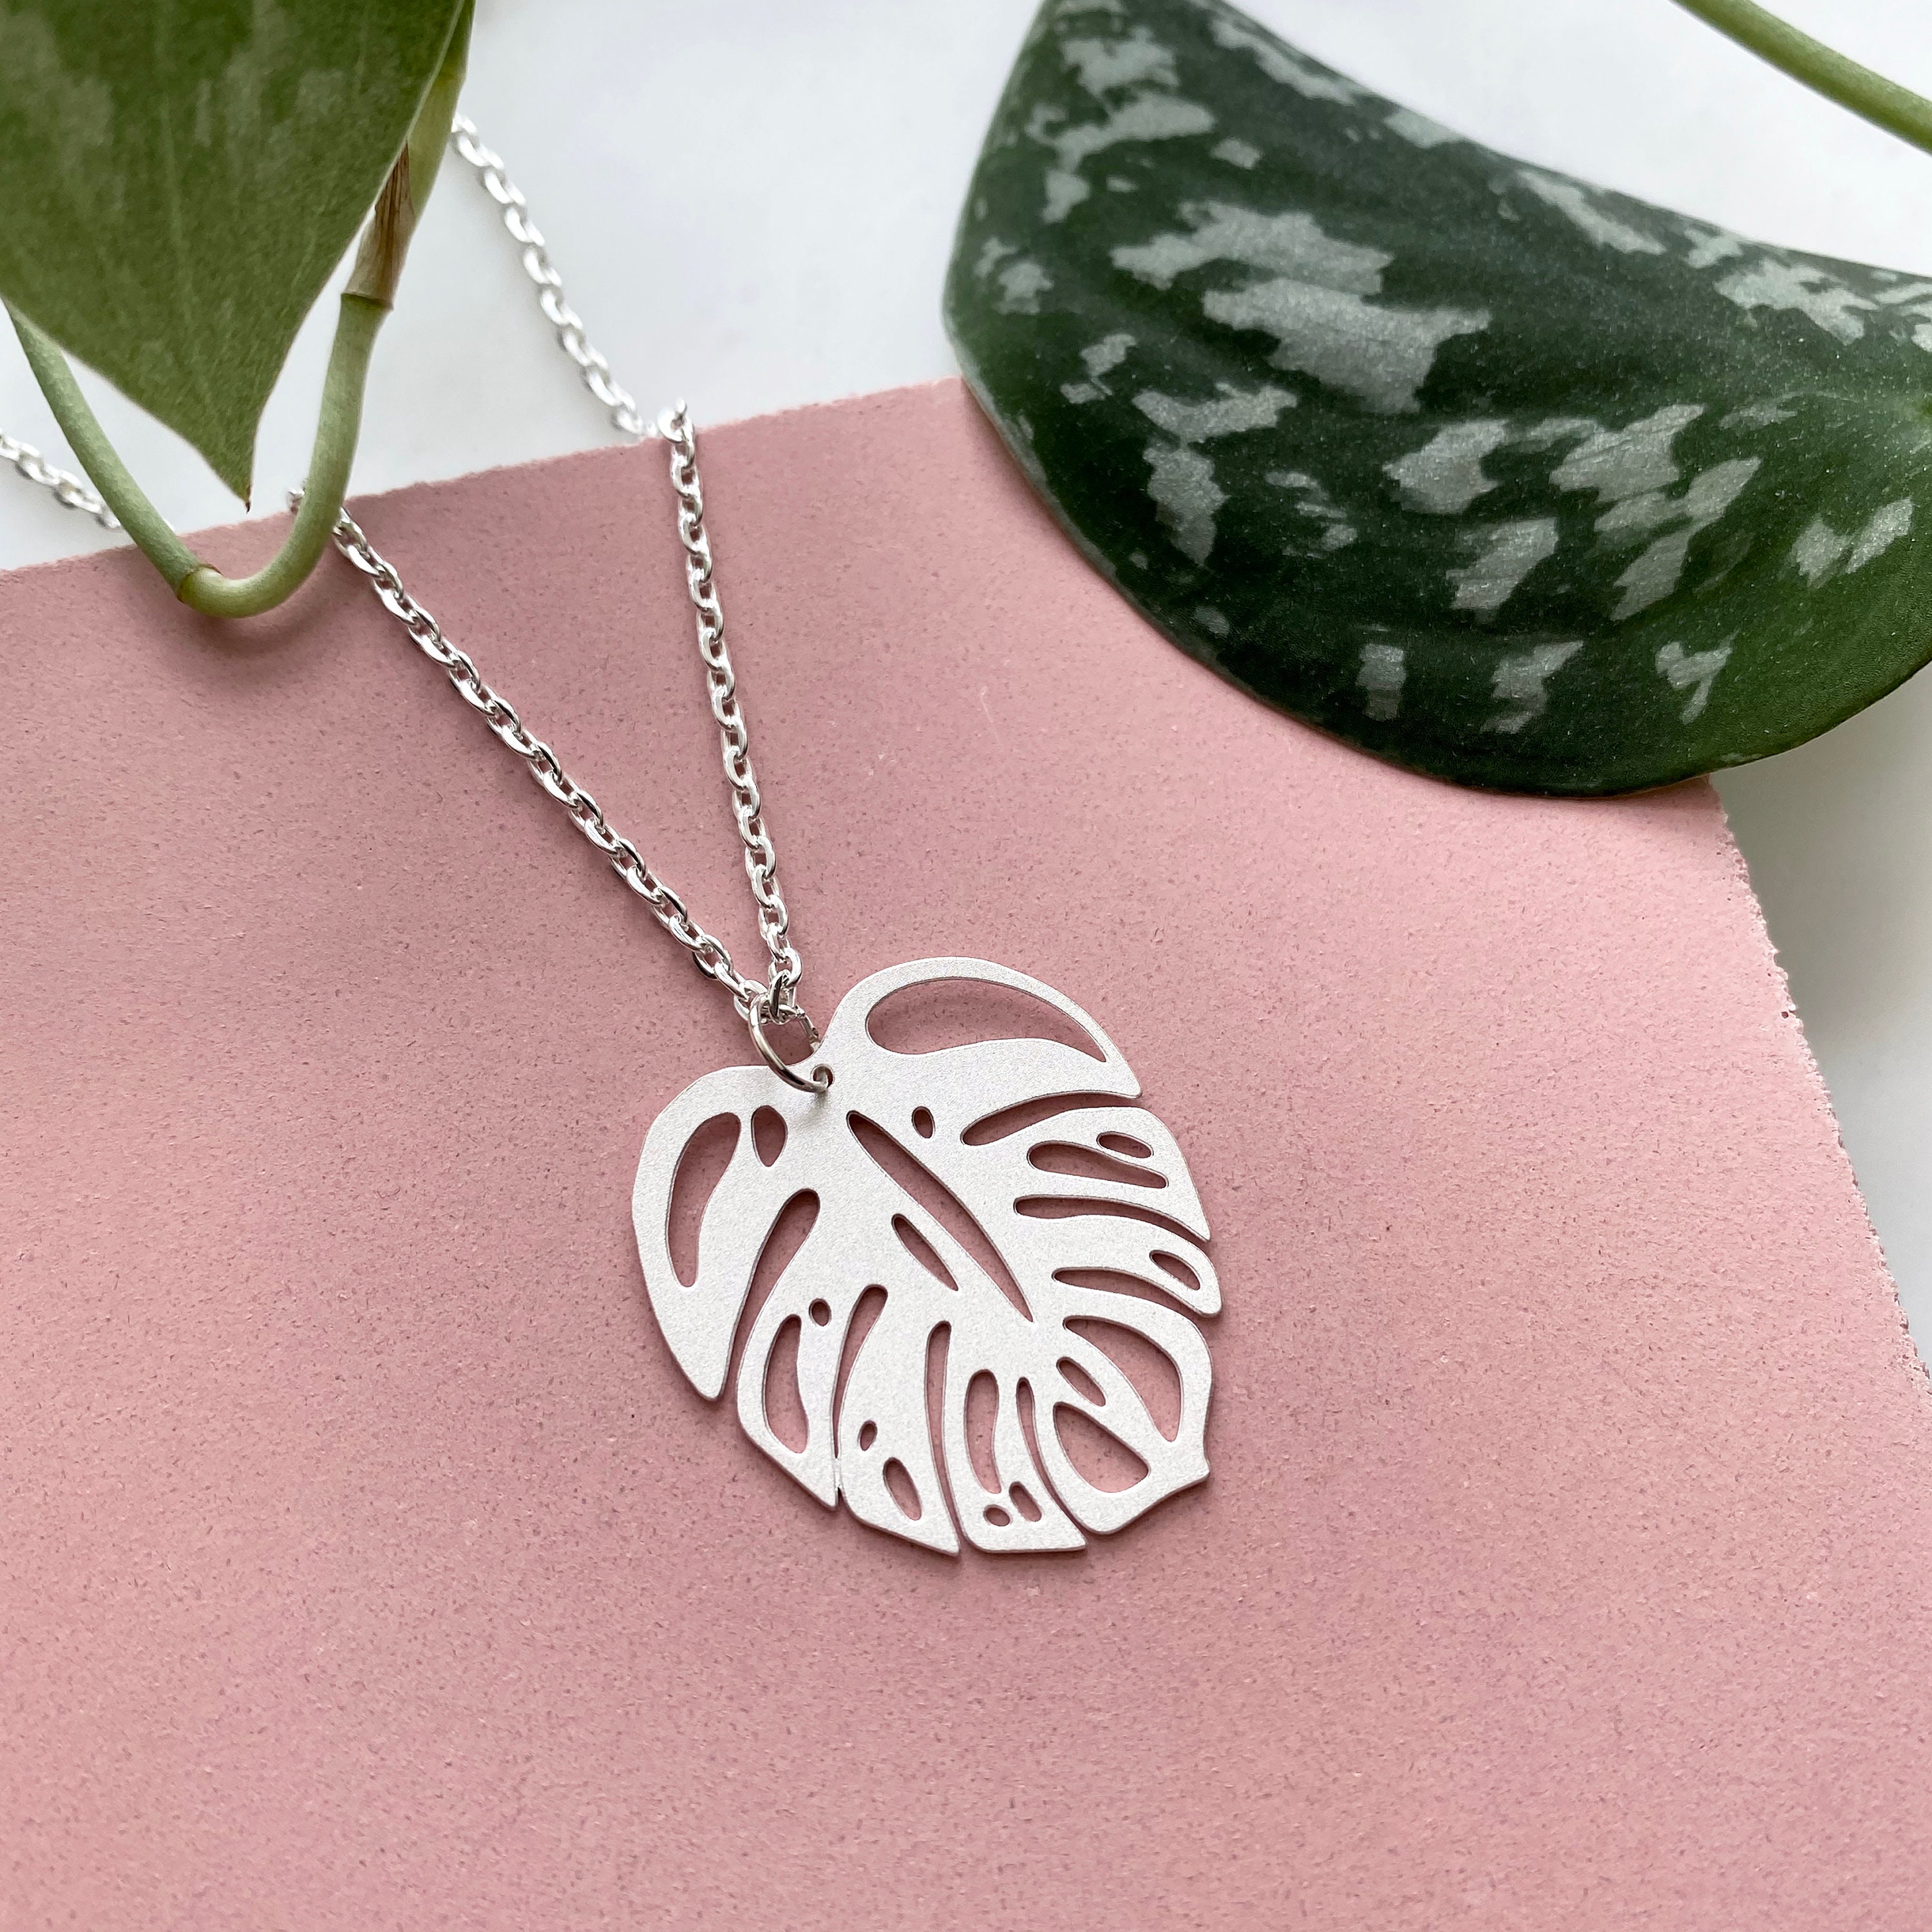 Silver Monstera Necklace - Cheese Plant Pendant House Jewellery Leaf Accessory